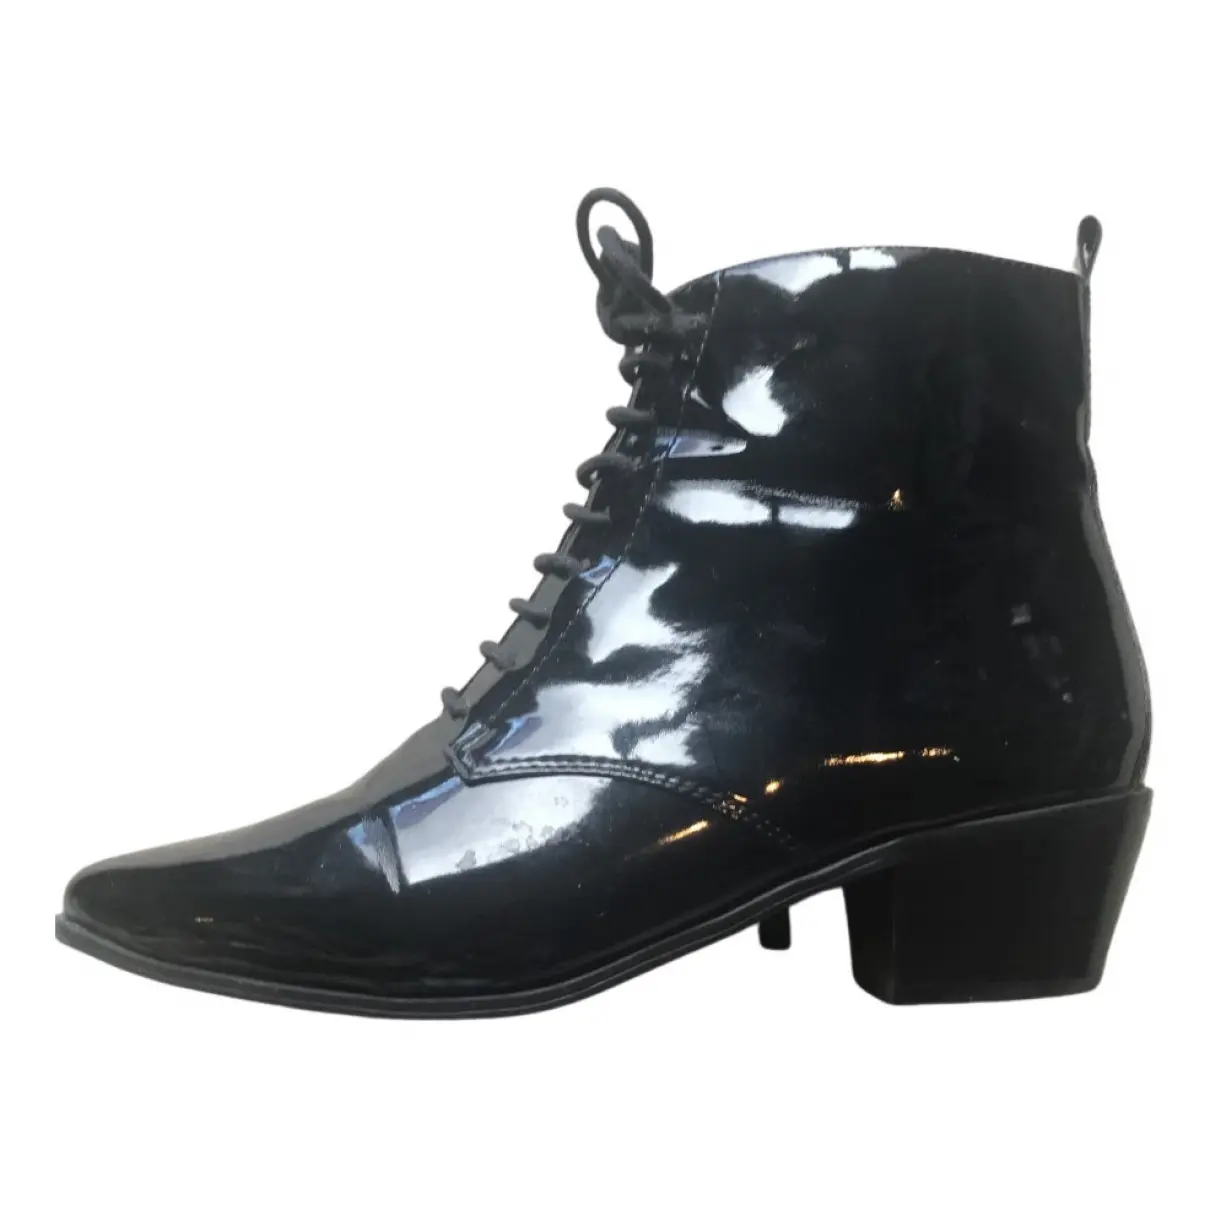 Patent leather lace up boots Nine West